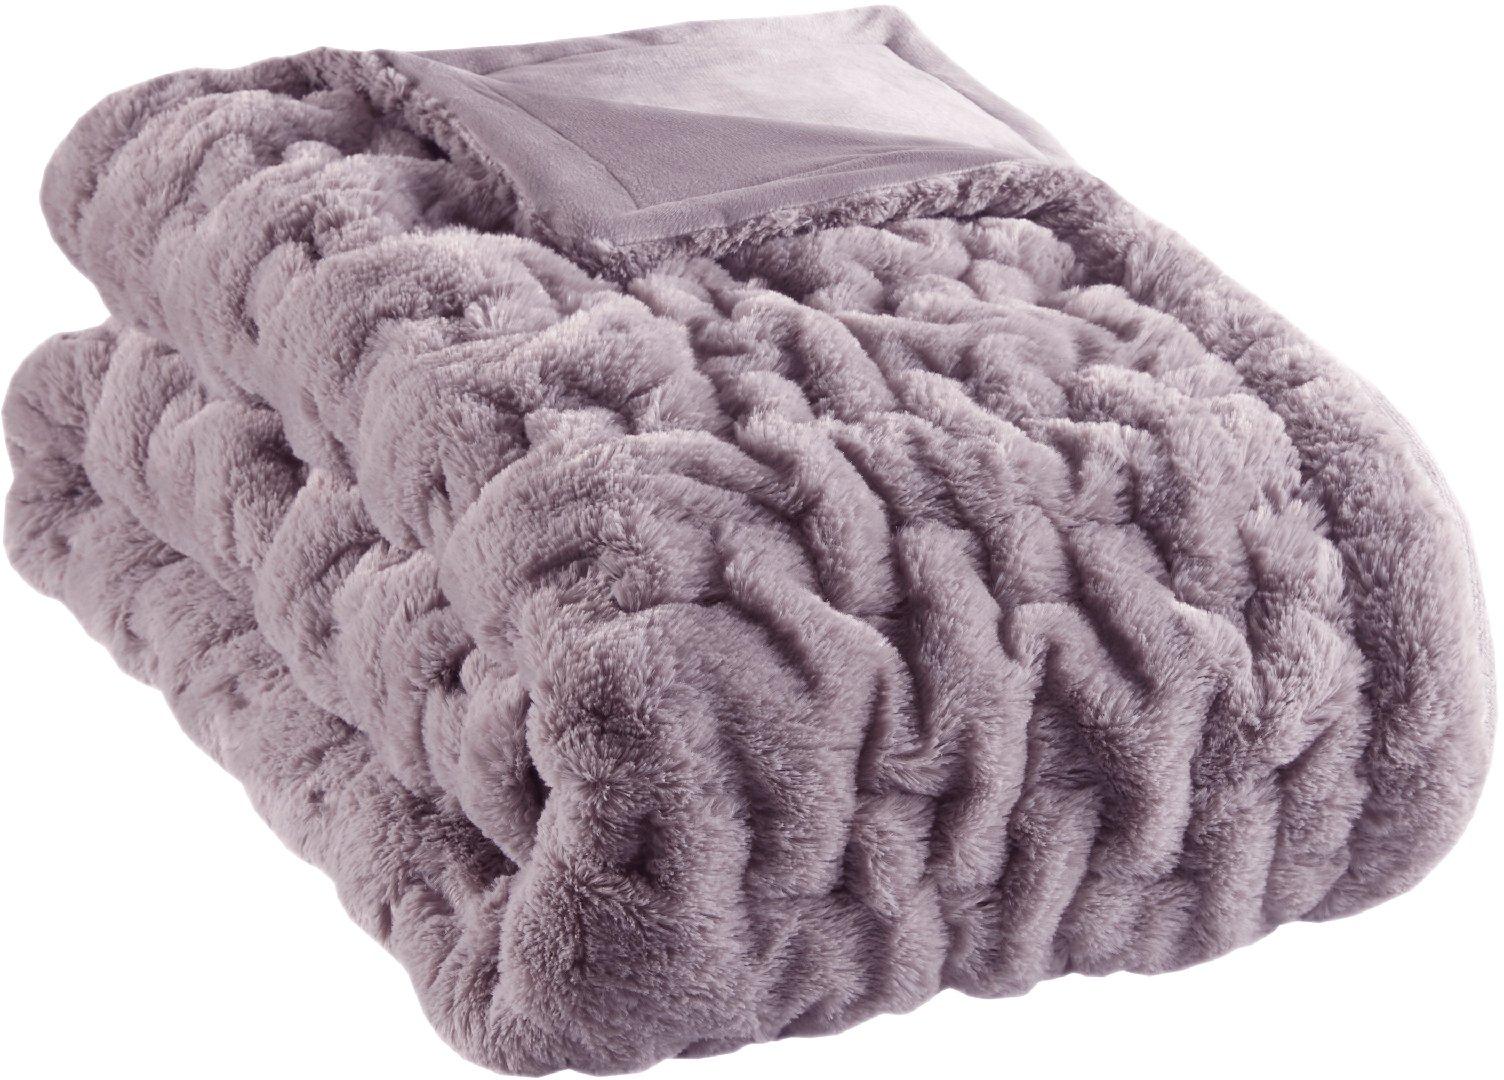 Ruched Fur Throw Blanket